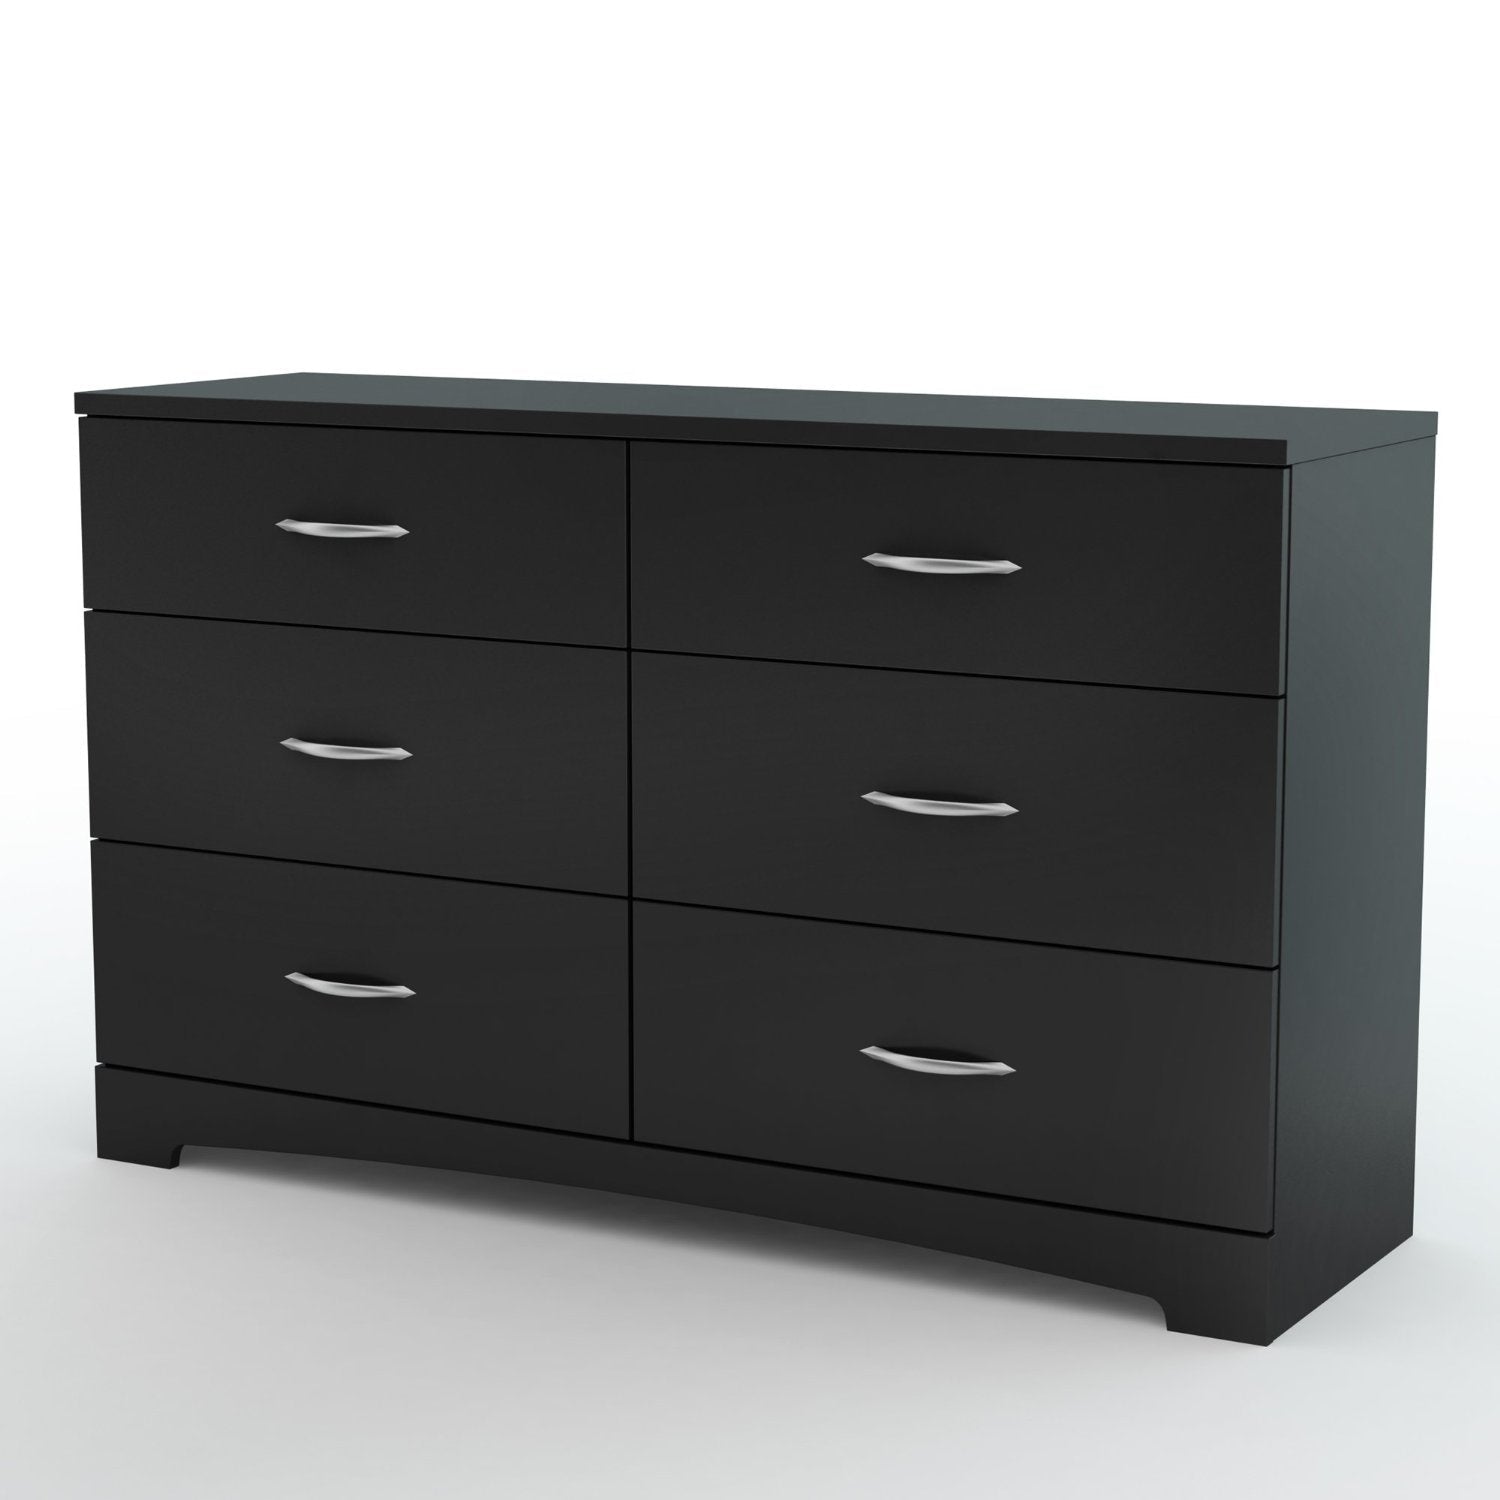 Bedroom > Nightstand And Dressers - 6-Drawer Dresser For Contemporary Bedroom In Black Finish